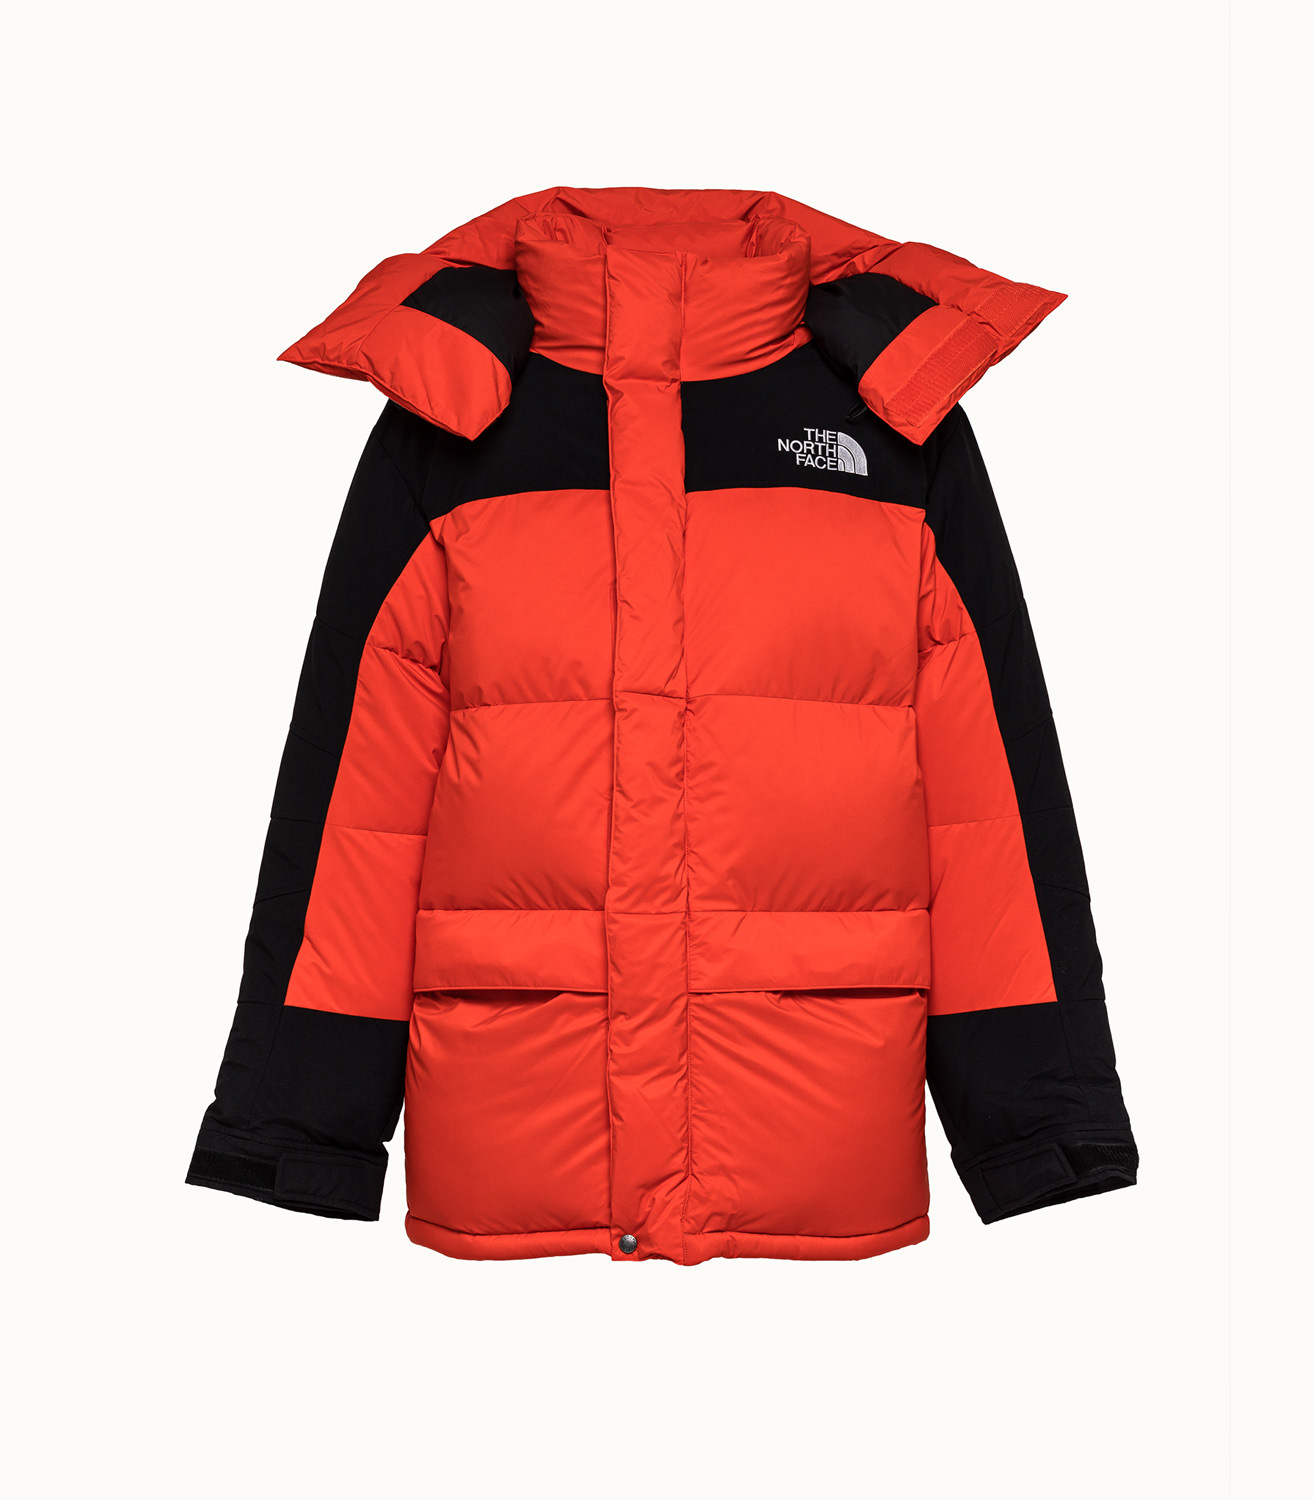 colorful north face jacket